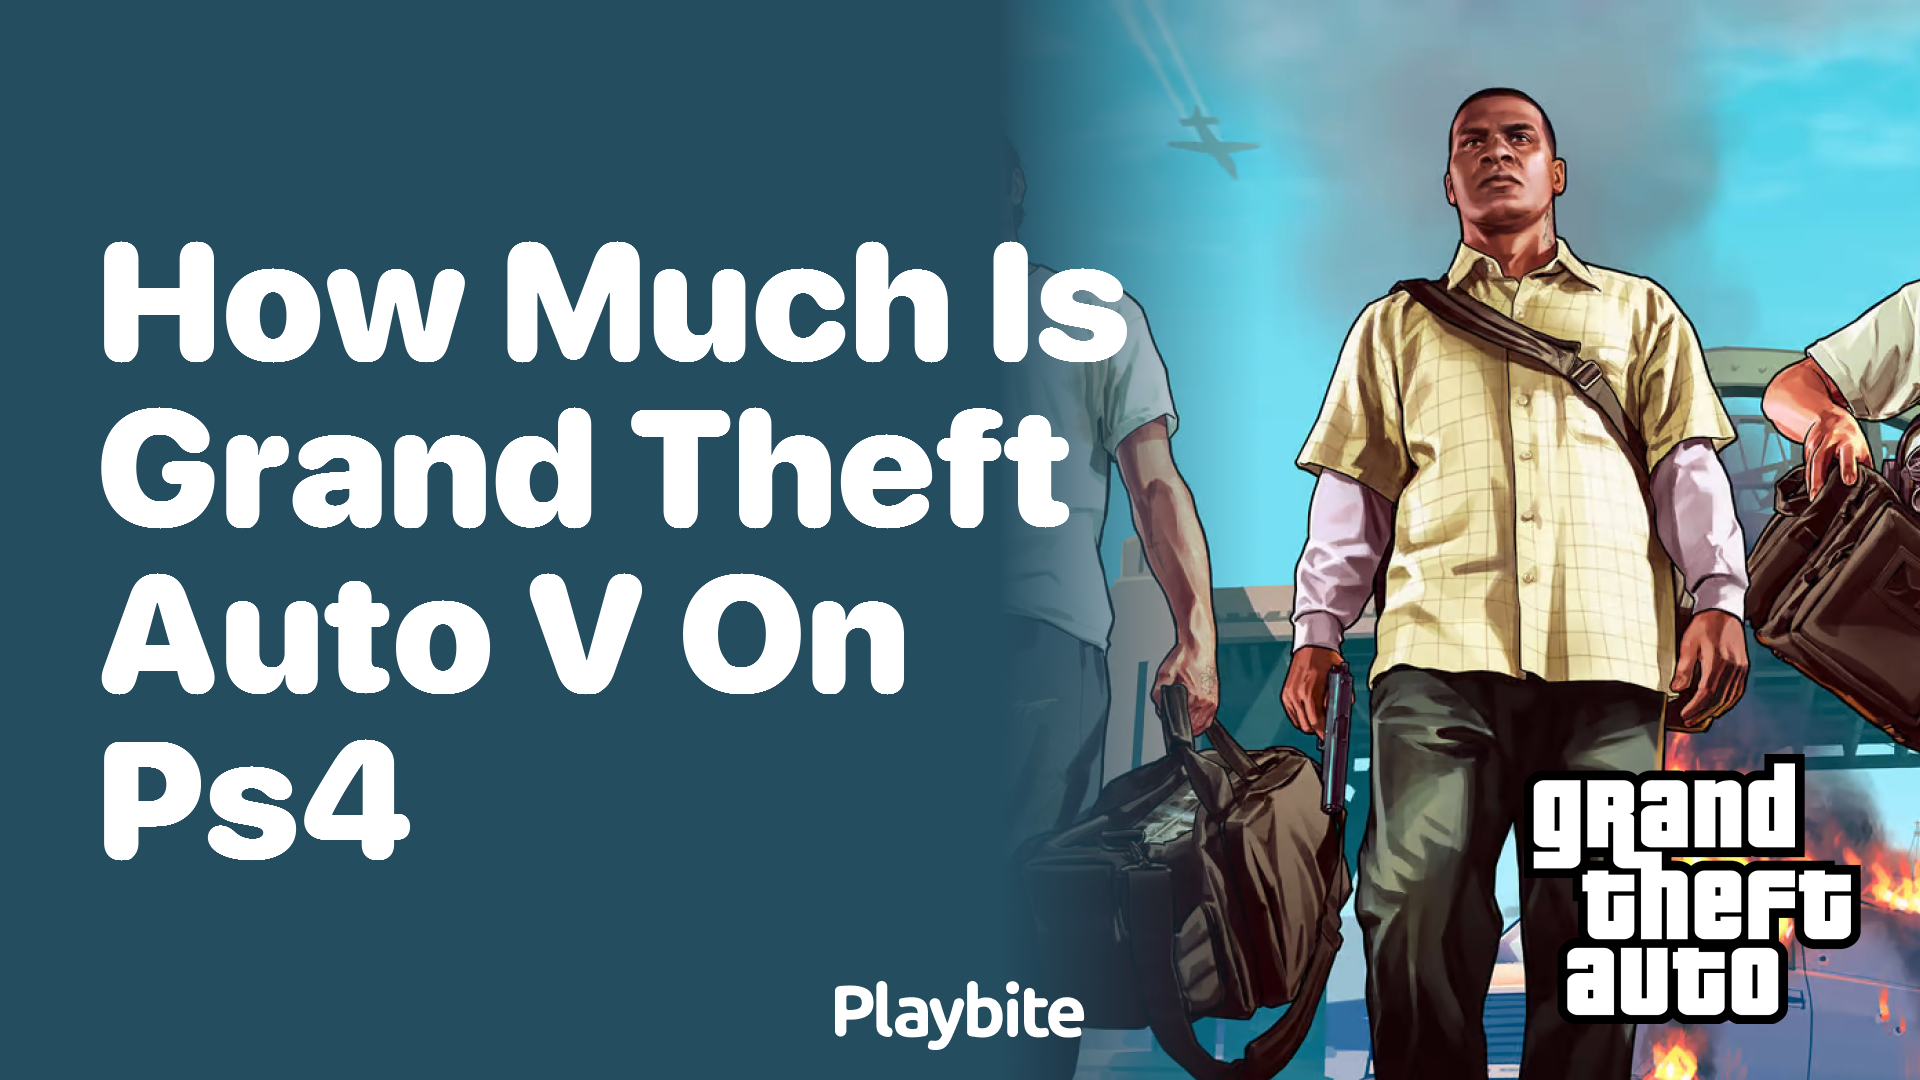 How much does Grand Theft Auto V cost on PS4?